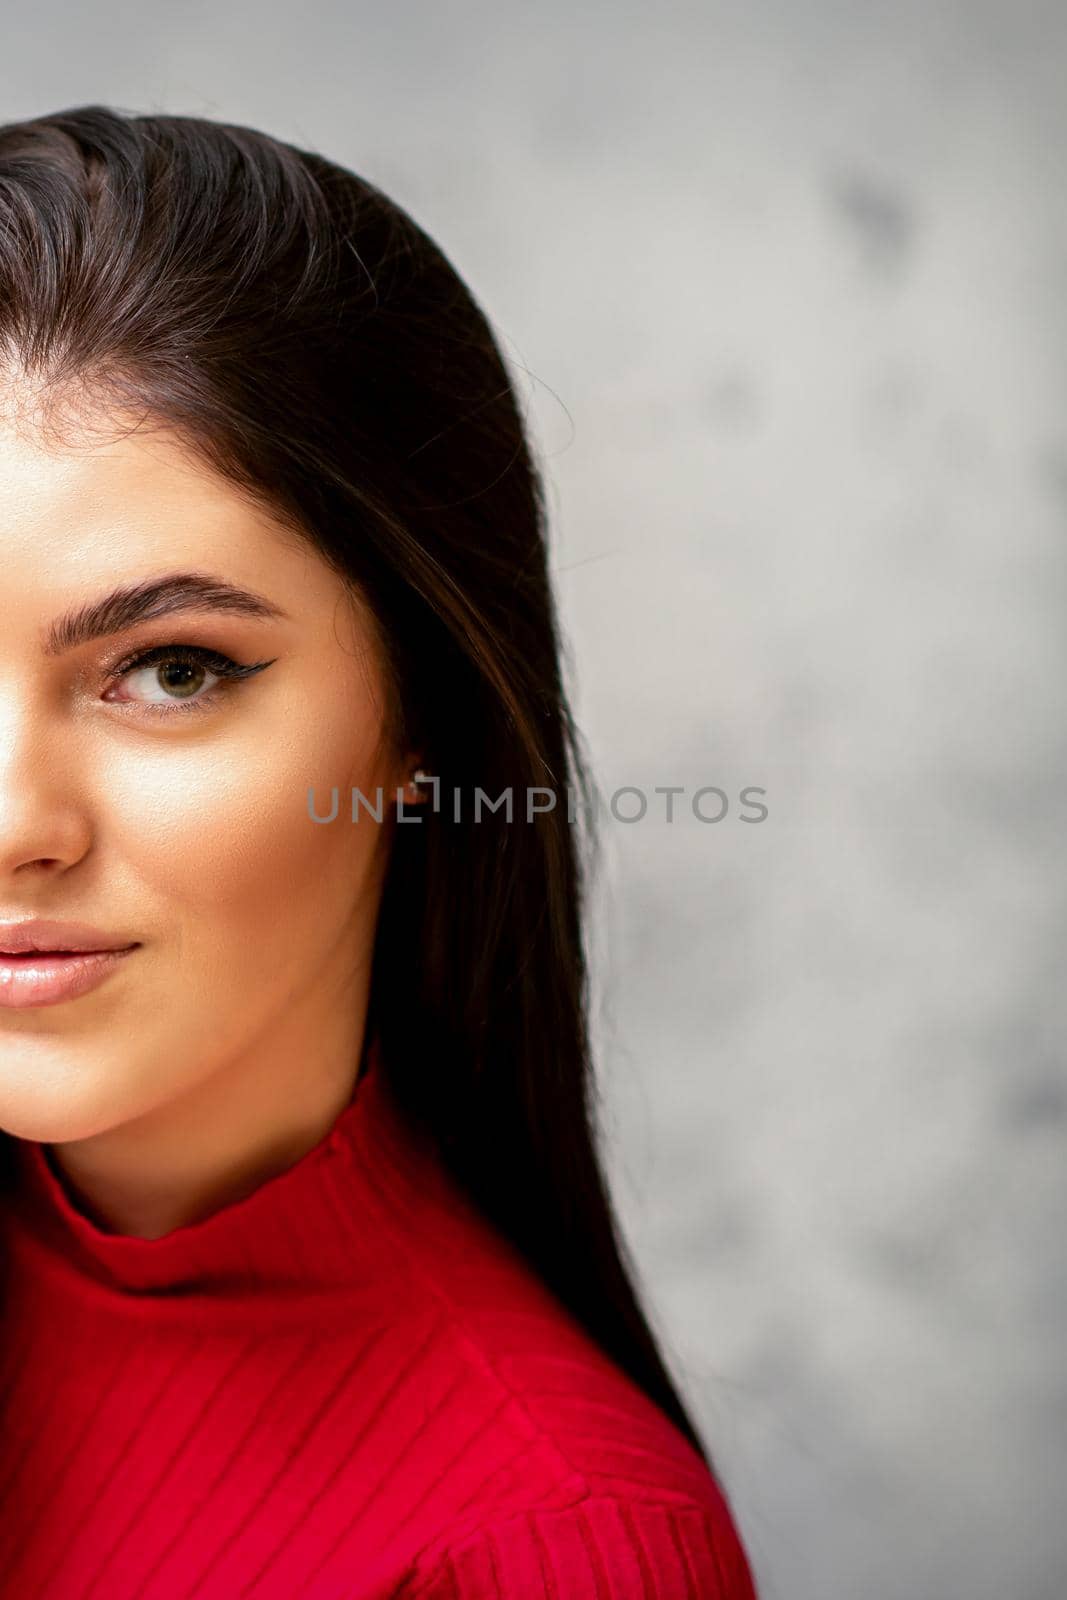 The fashionable young woman. Portrait of the beautiful female model with long hair and makeup. Beauty young caucasian woman with a black hairstyle on the background of a gray wall